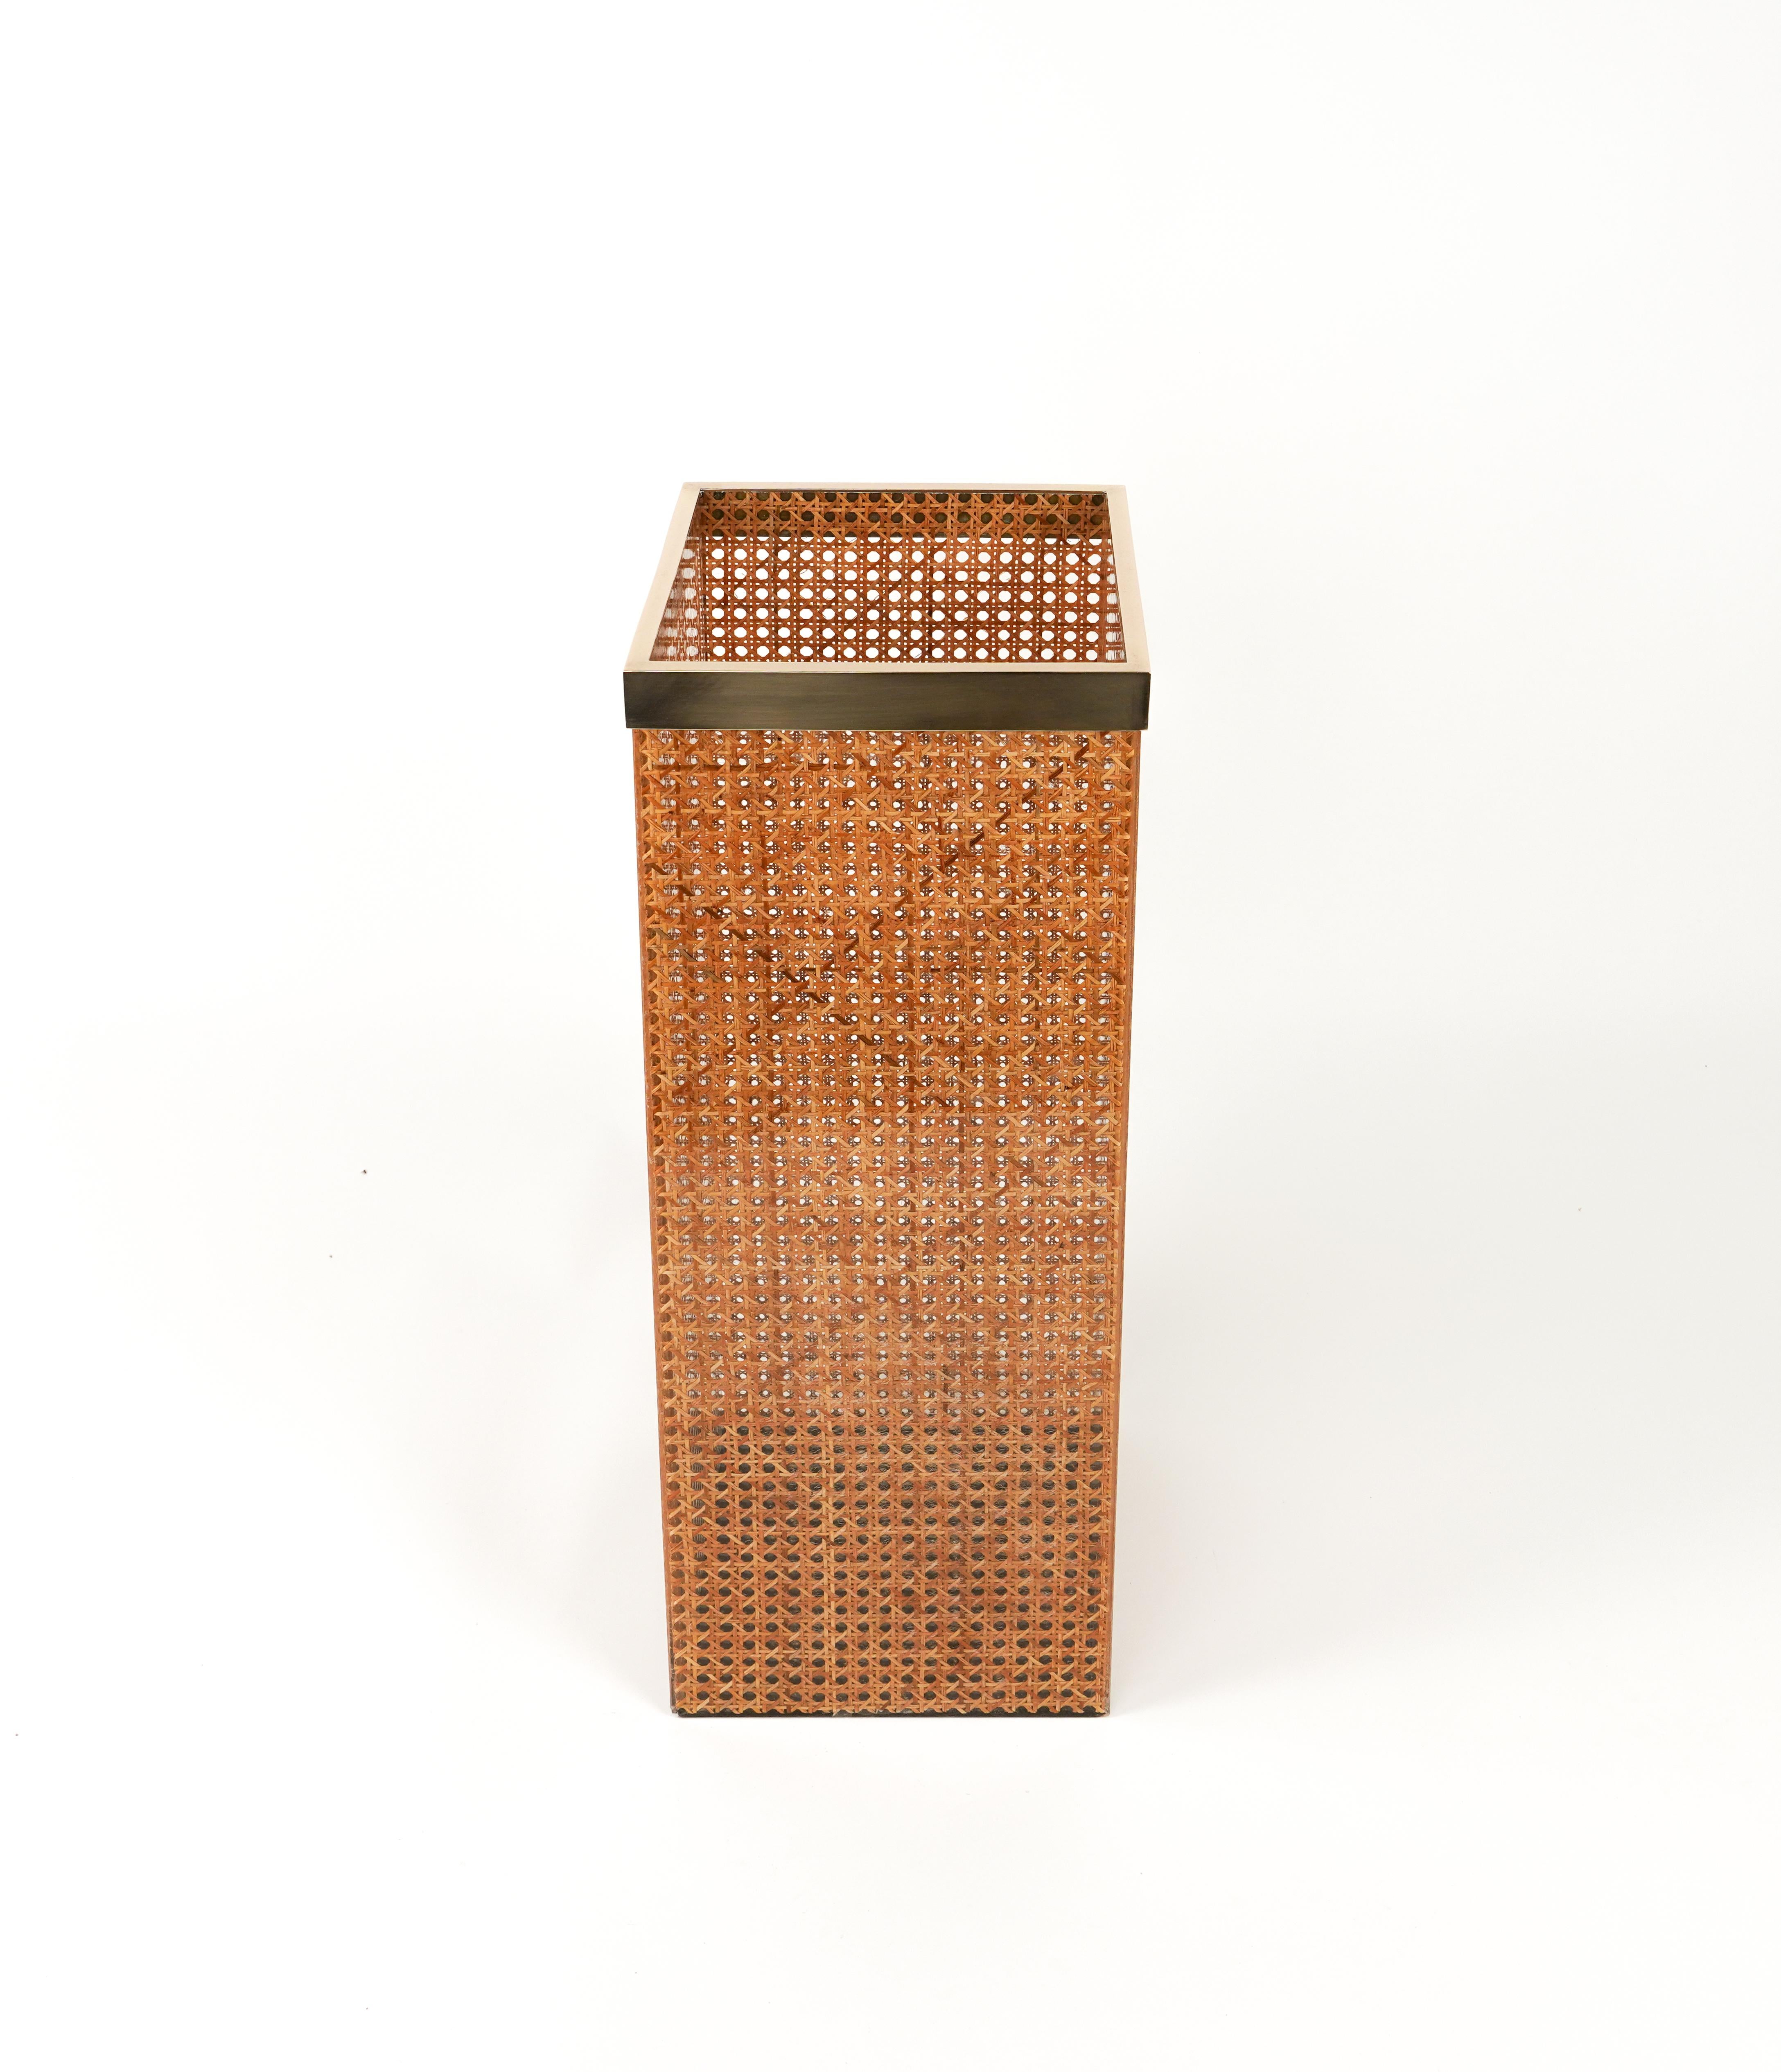 Late 20th Century Umbrella Stand in Lucite, Rattan and Brass Christian Dior Style, Italy 1970s For Sale